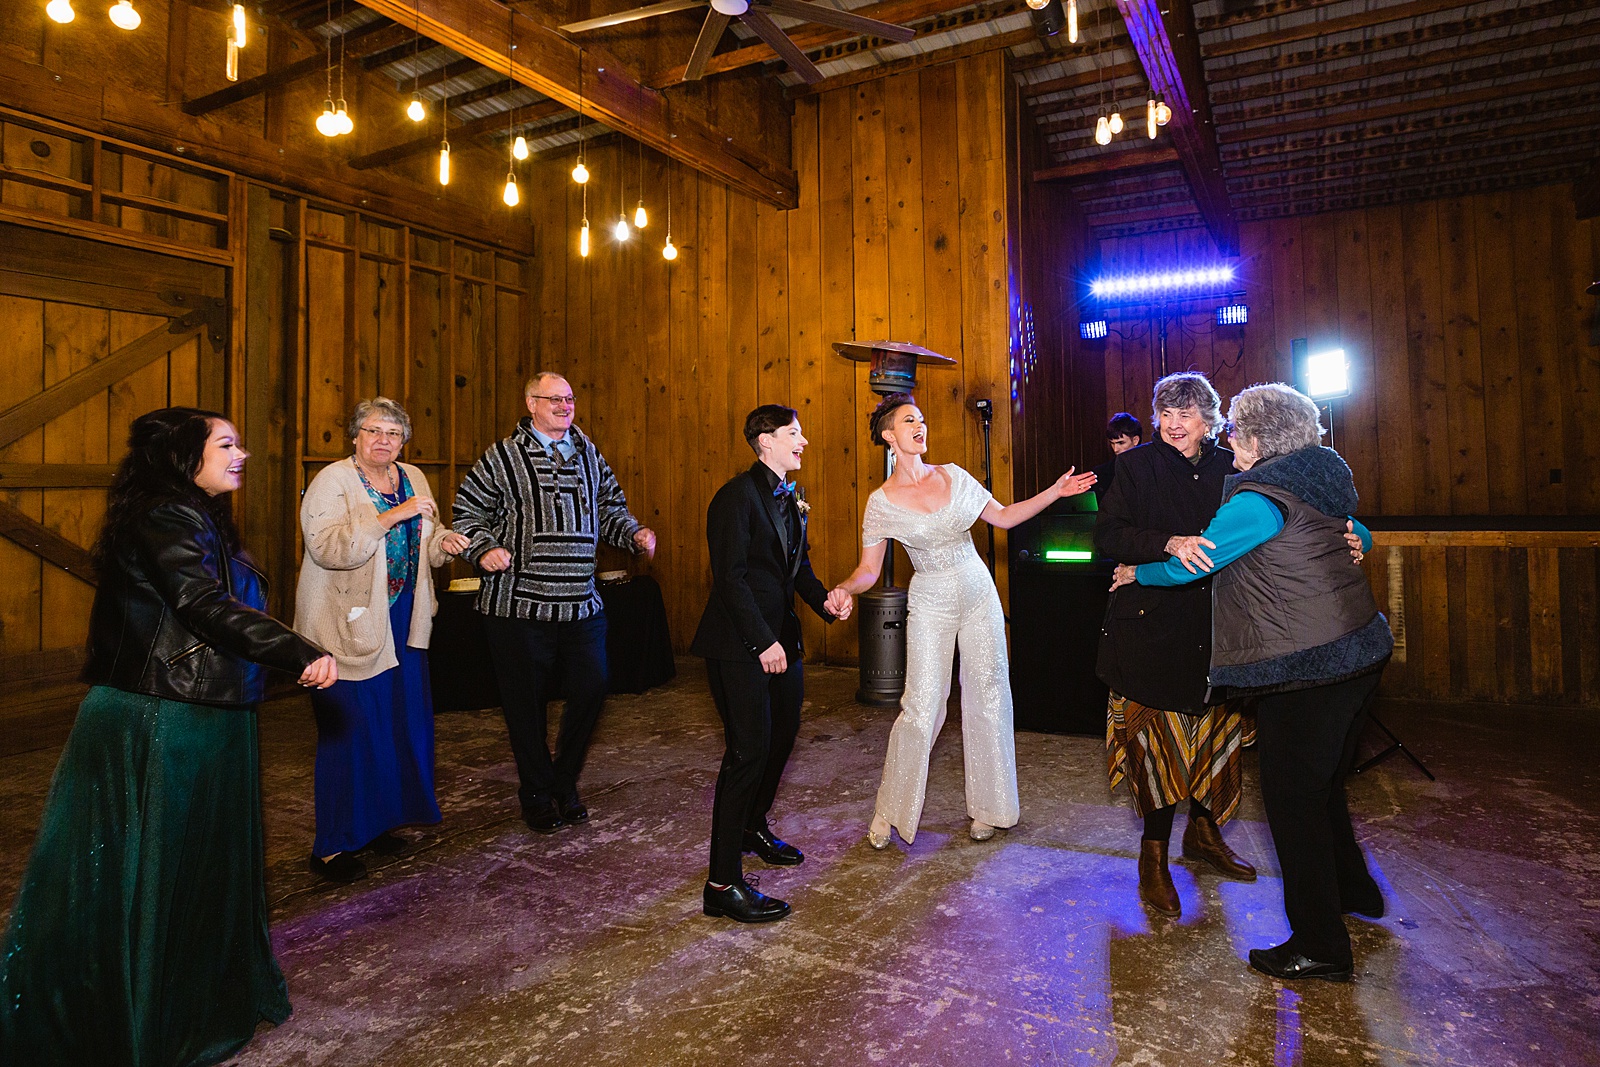 Brides dancing with guests at Mortimer Farms wedding reception by Prescott wedding photographer PMA Photography